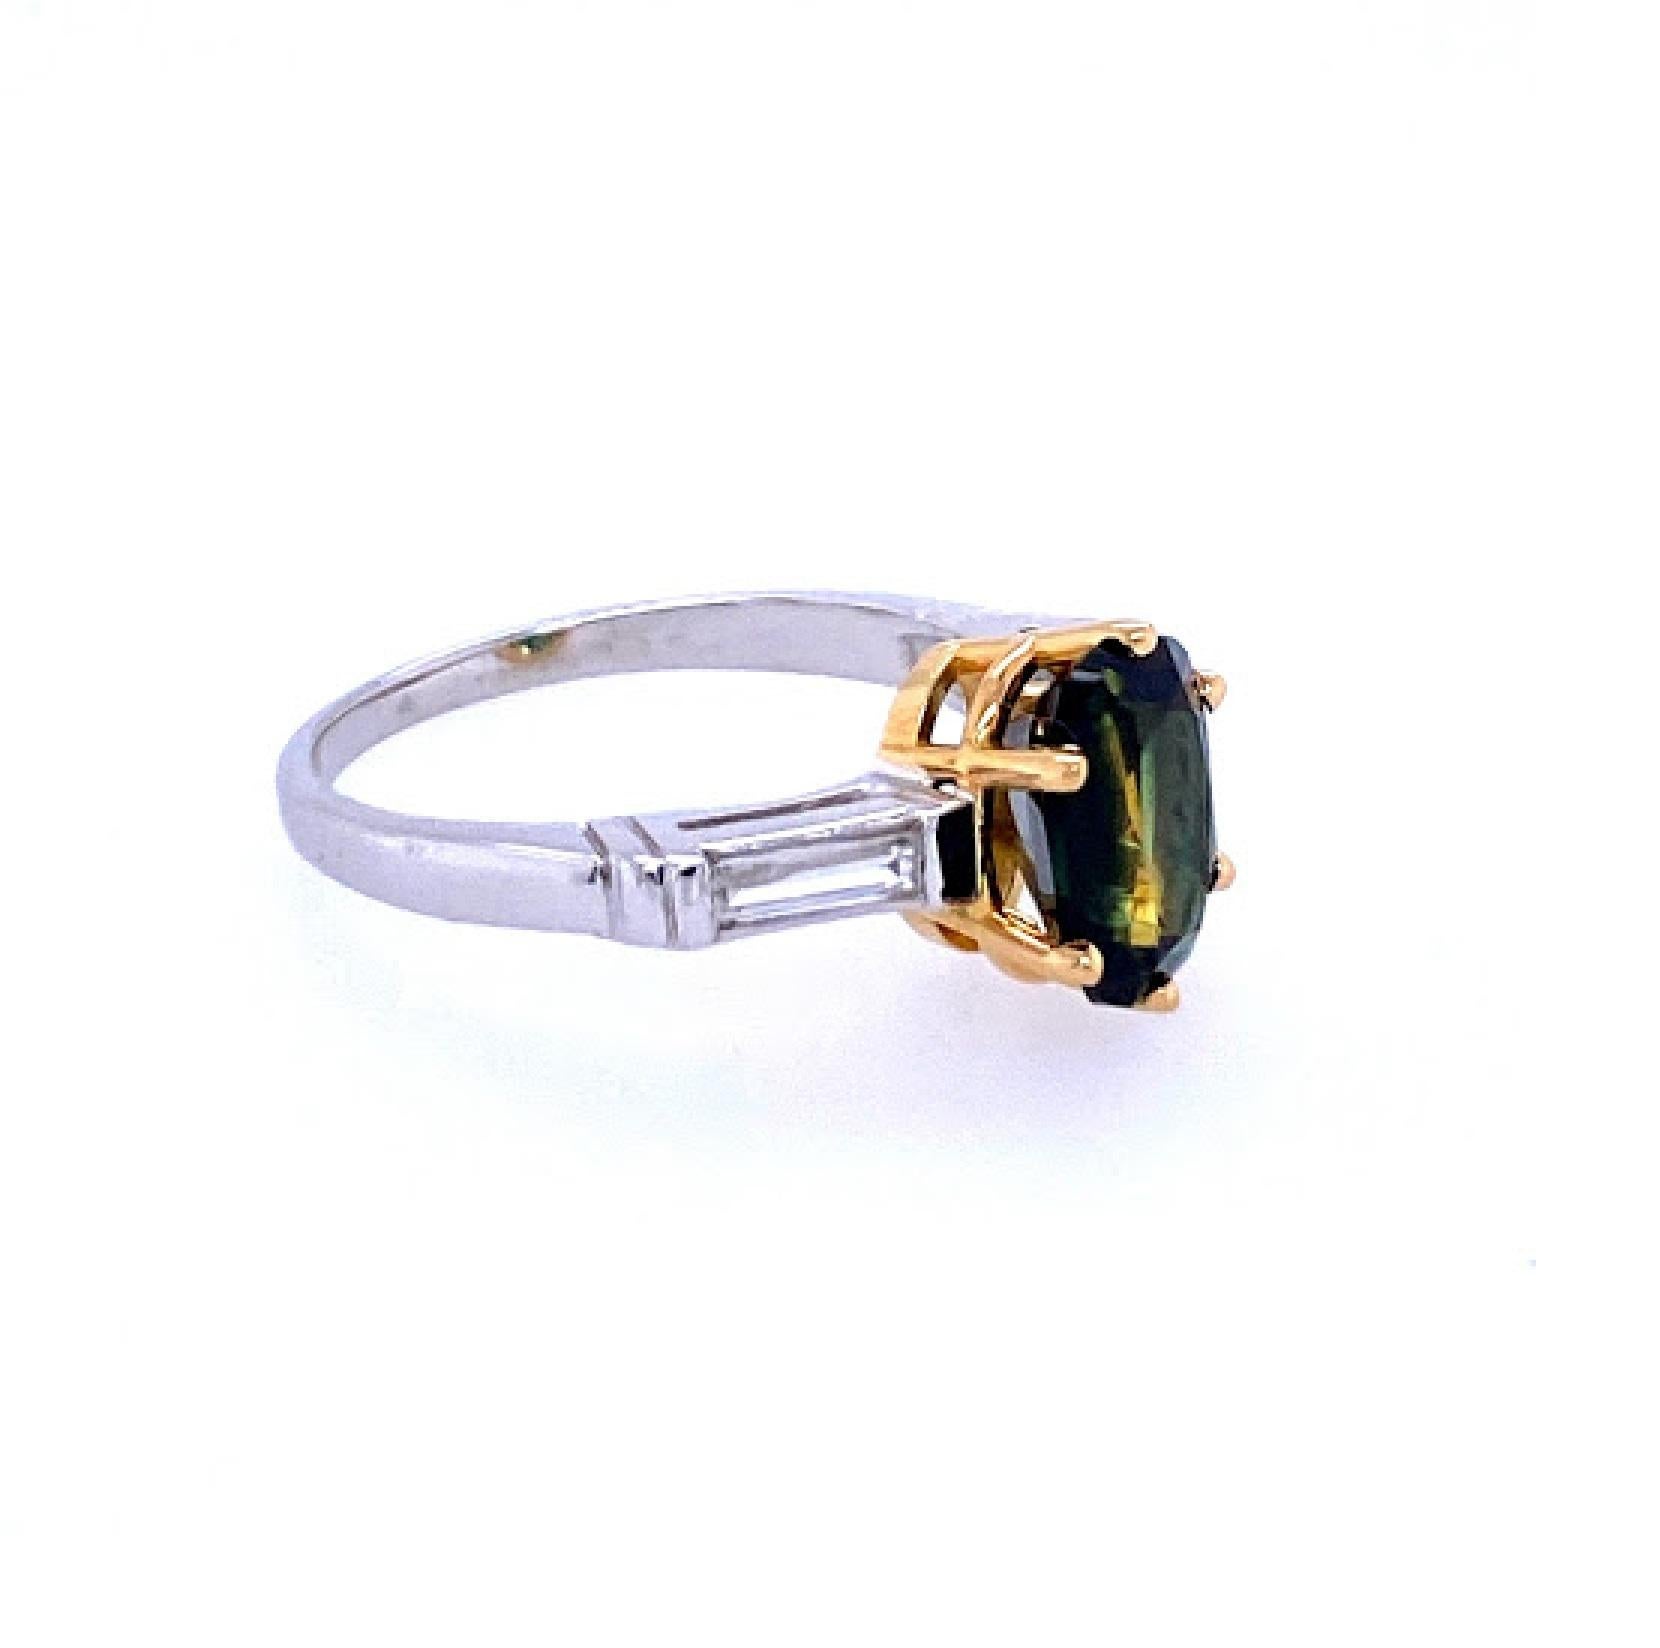 Platinum (stamped 10%IRID PLAT) ring featuring 8.85 mm by 6.9 mm oval green sapphire weighing 2.74 carat, set in a 18 karat yellow gold 6 prong basket head. The center stone is flanked by two 5.5 mm by 2.5 mm straight baguette diamonds weighing 0.12